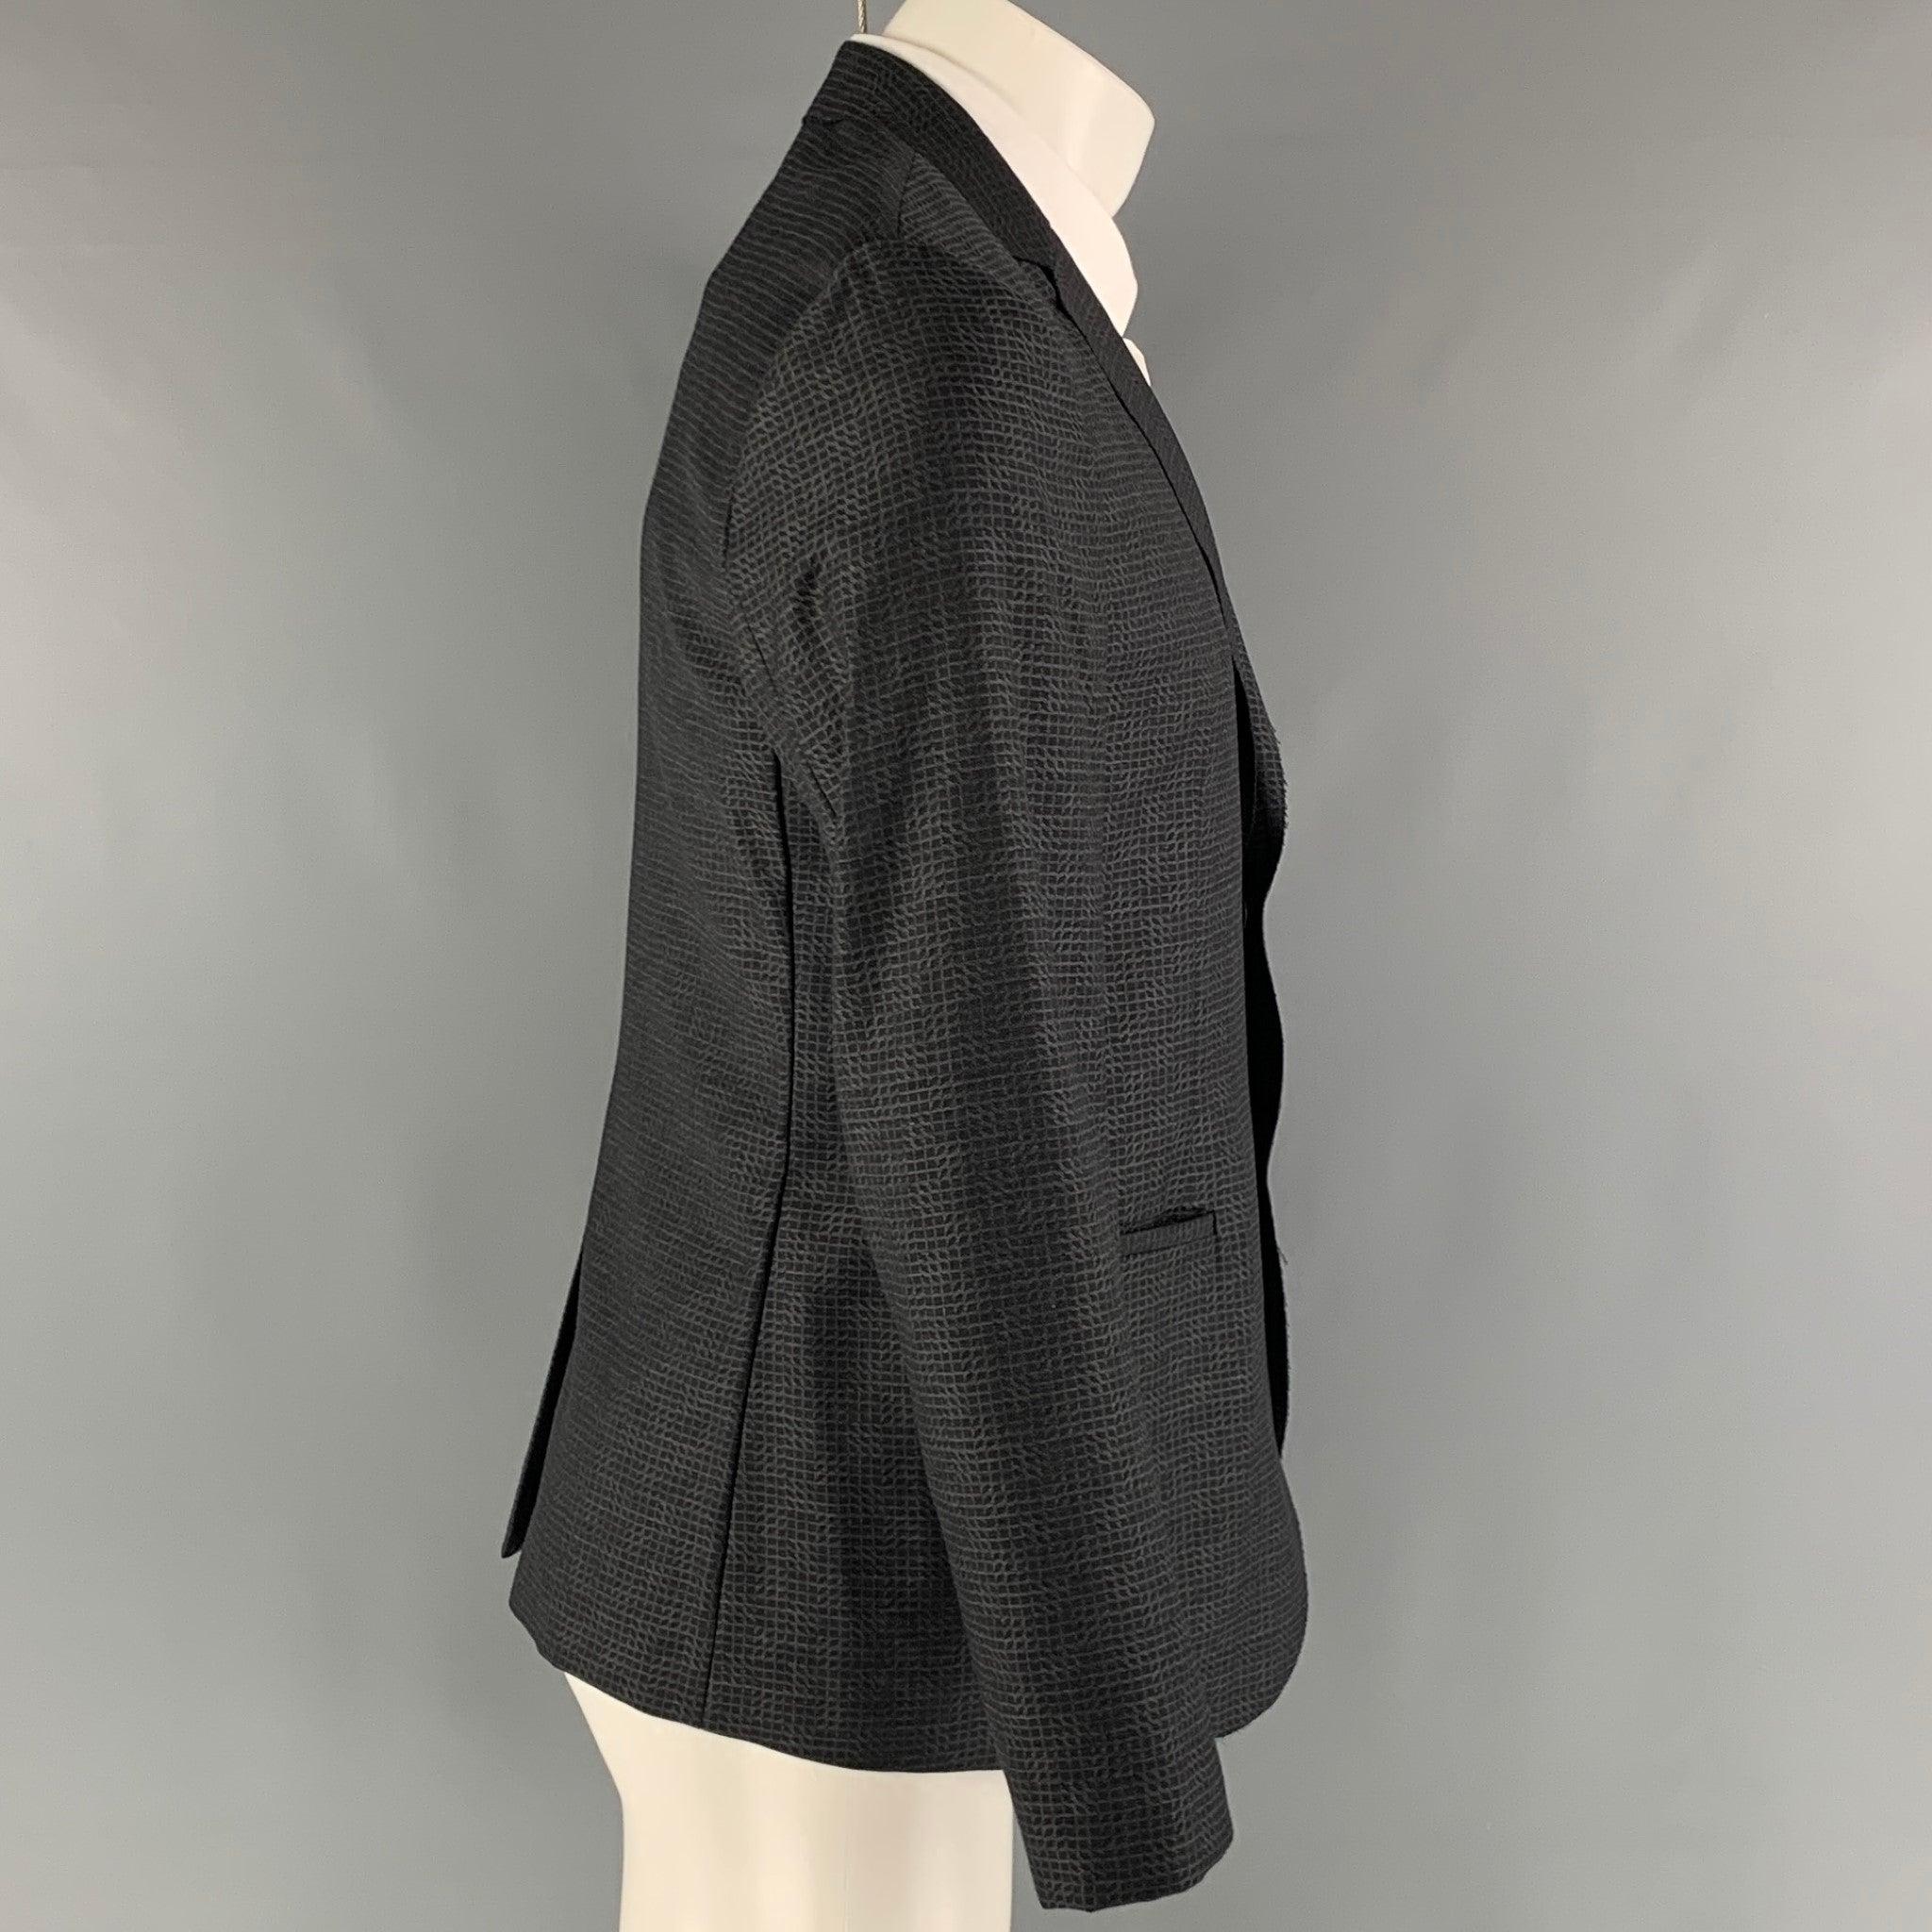 EMPORIO ARMANI sport coat comes in a charcoal and grey wool woven material no lining featuring a notch lapel, welt pockets, and a two snap button closure. Made in Italy. Excellent Pre-Owned Condition. 

Marked:   48 

Measurements: 
 
Shoulder: 16.5